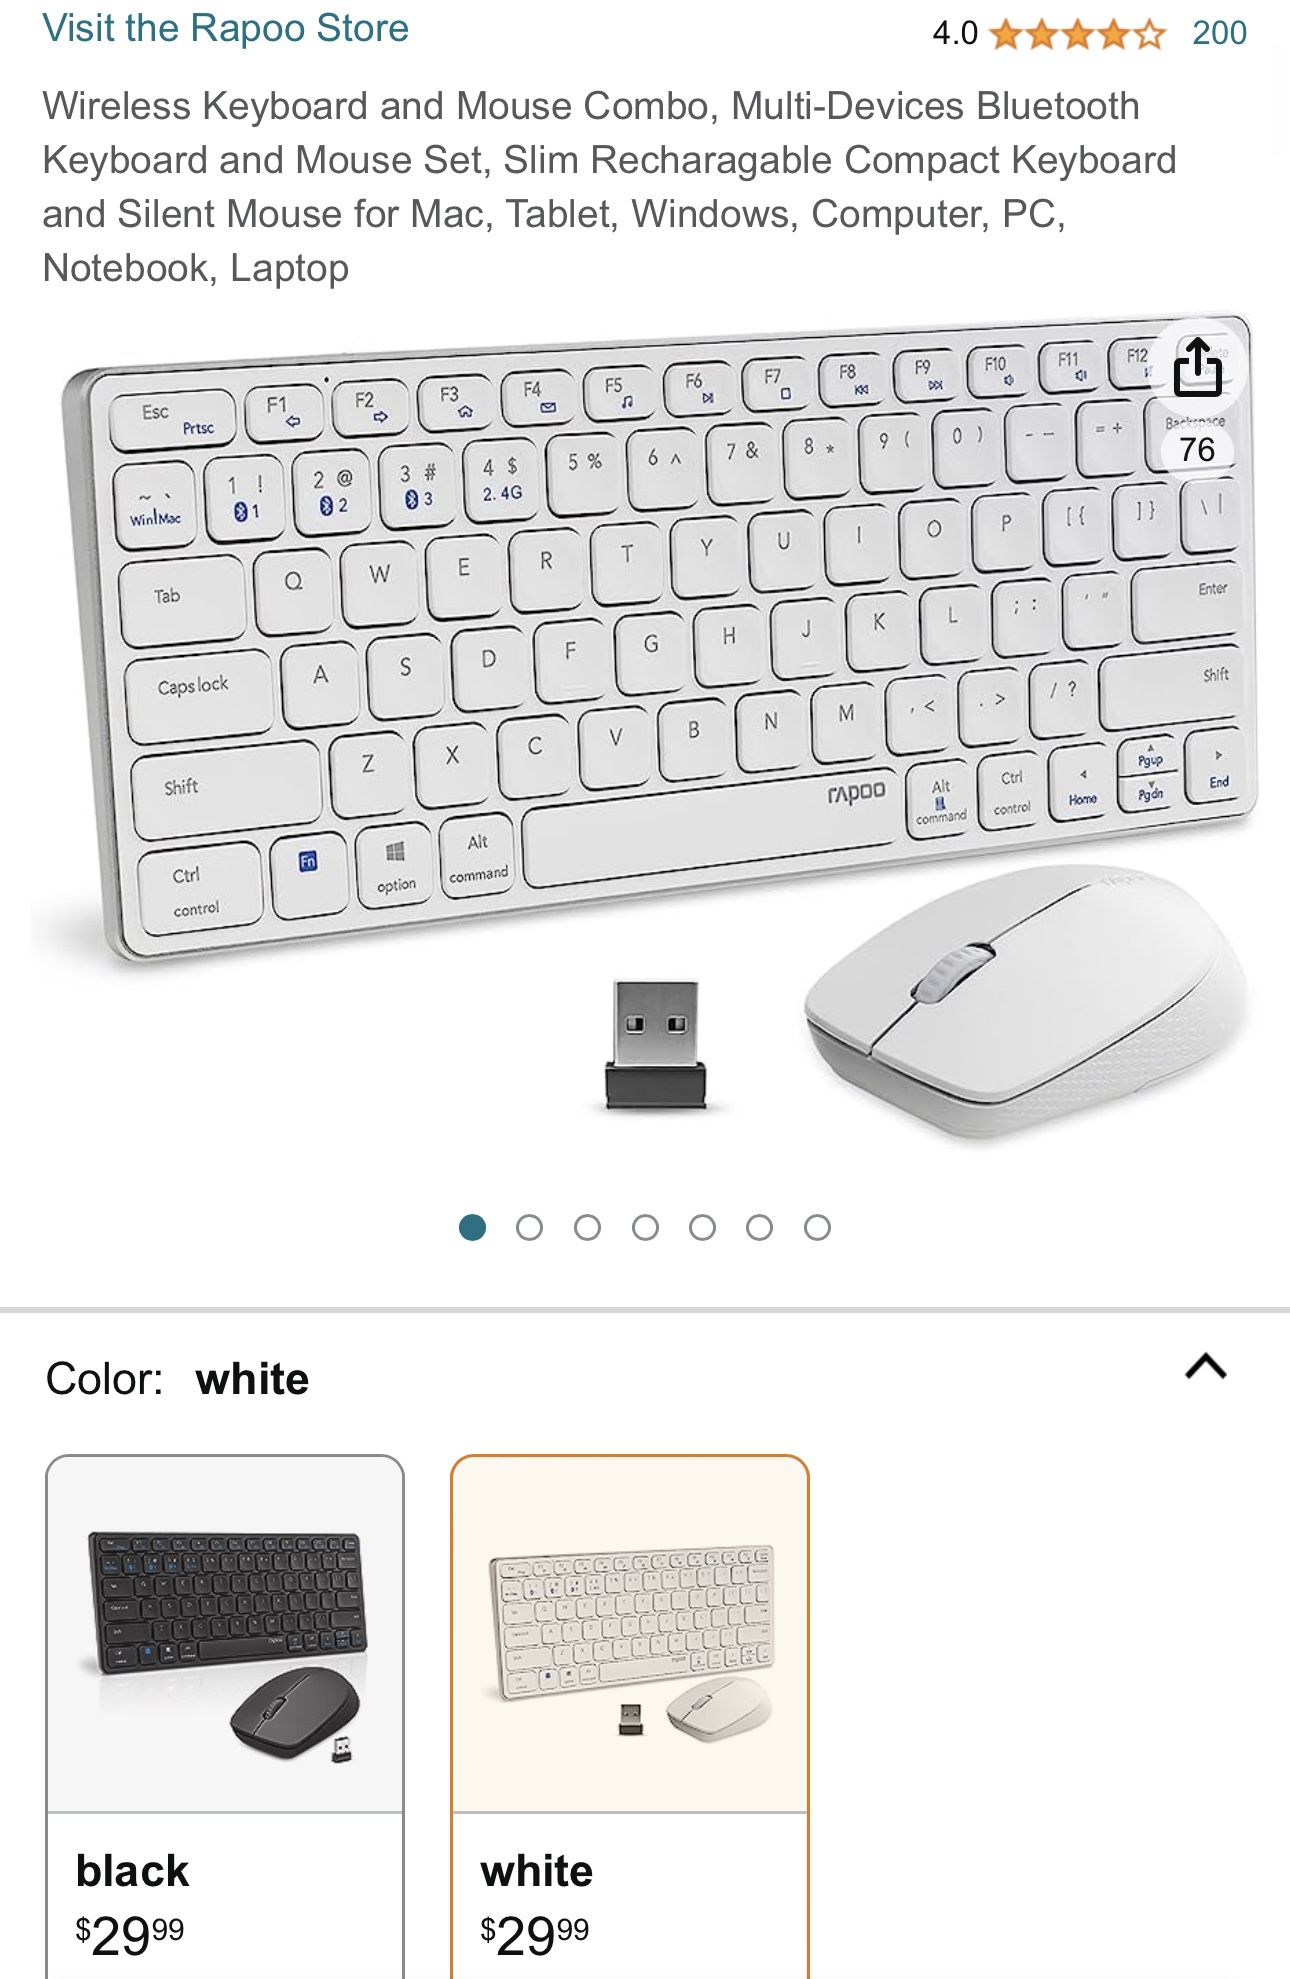 Wireless Keyboard and Mouse Combo, Multi-Devices Bluetooth Keyboard and Mouse Set, Slim Recharagable Compact Keyboard and Silent Mouse for Mac, Tablet